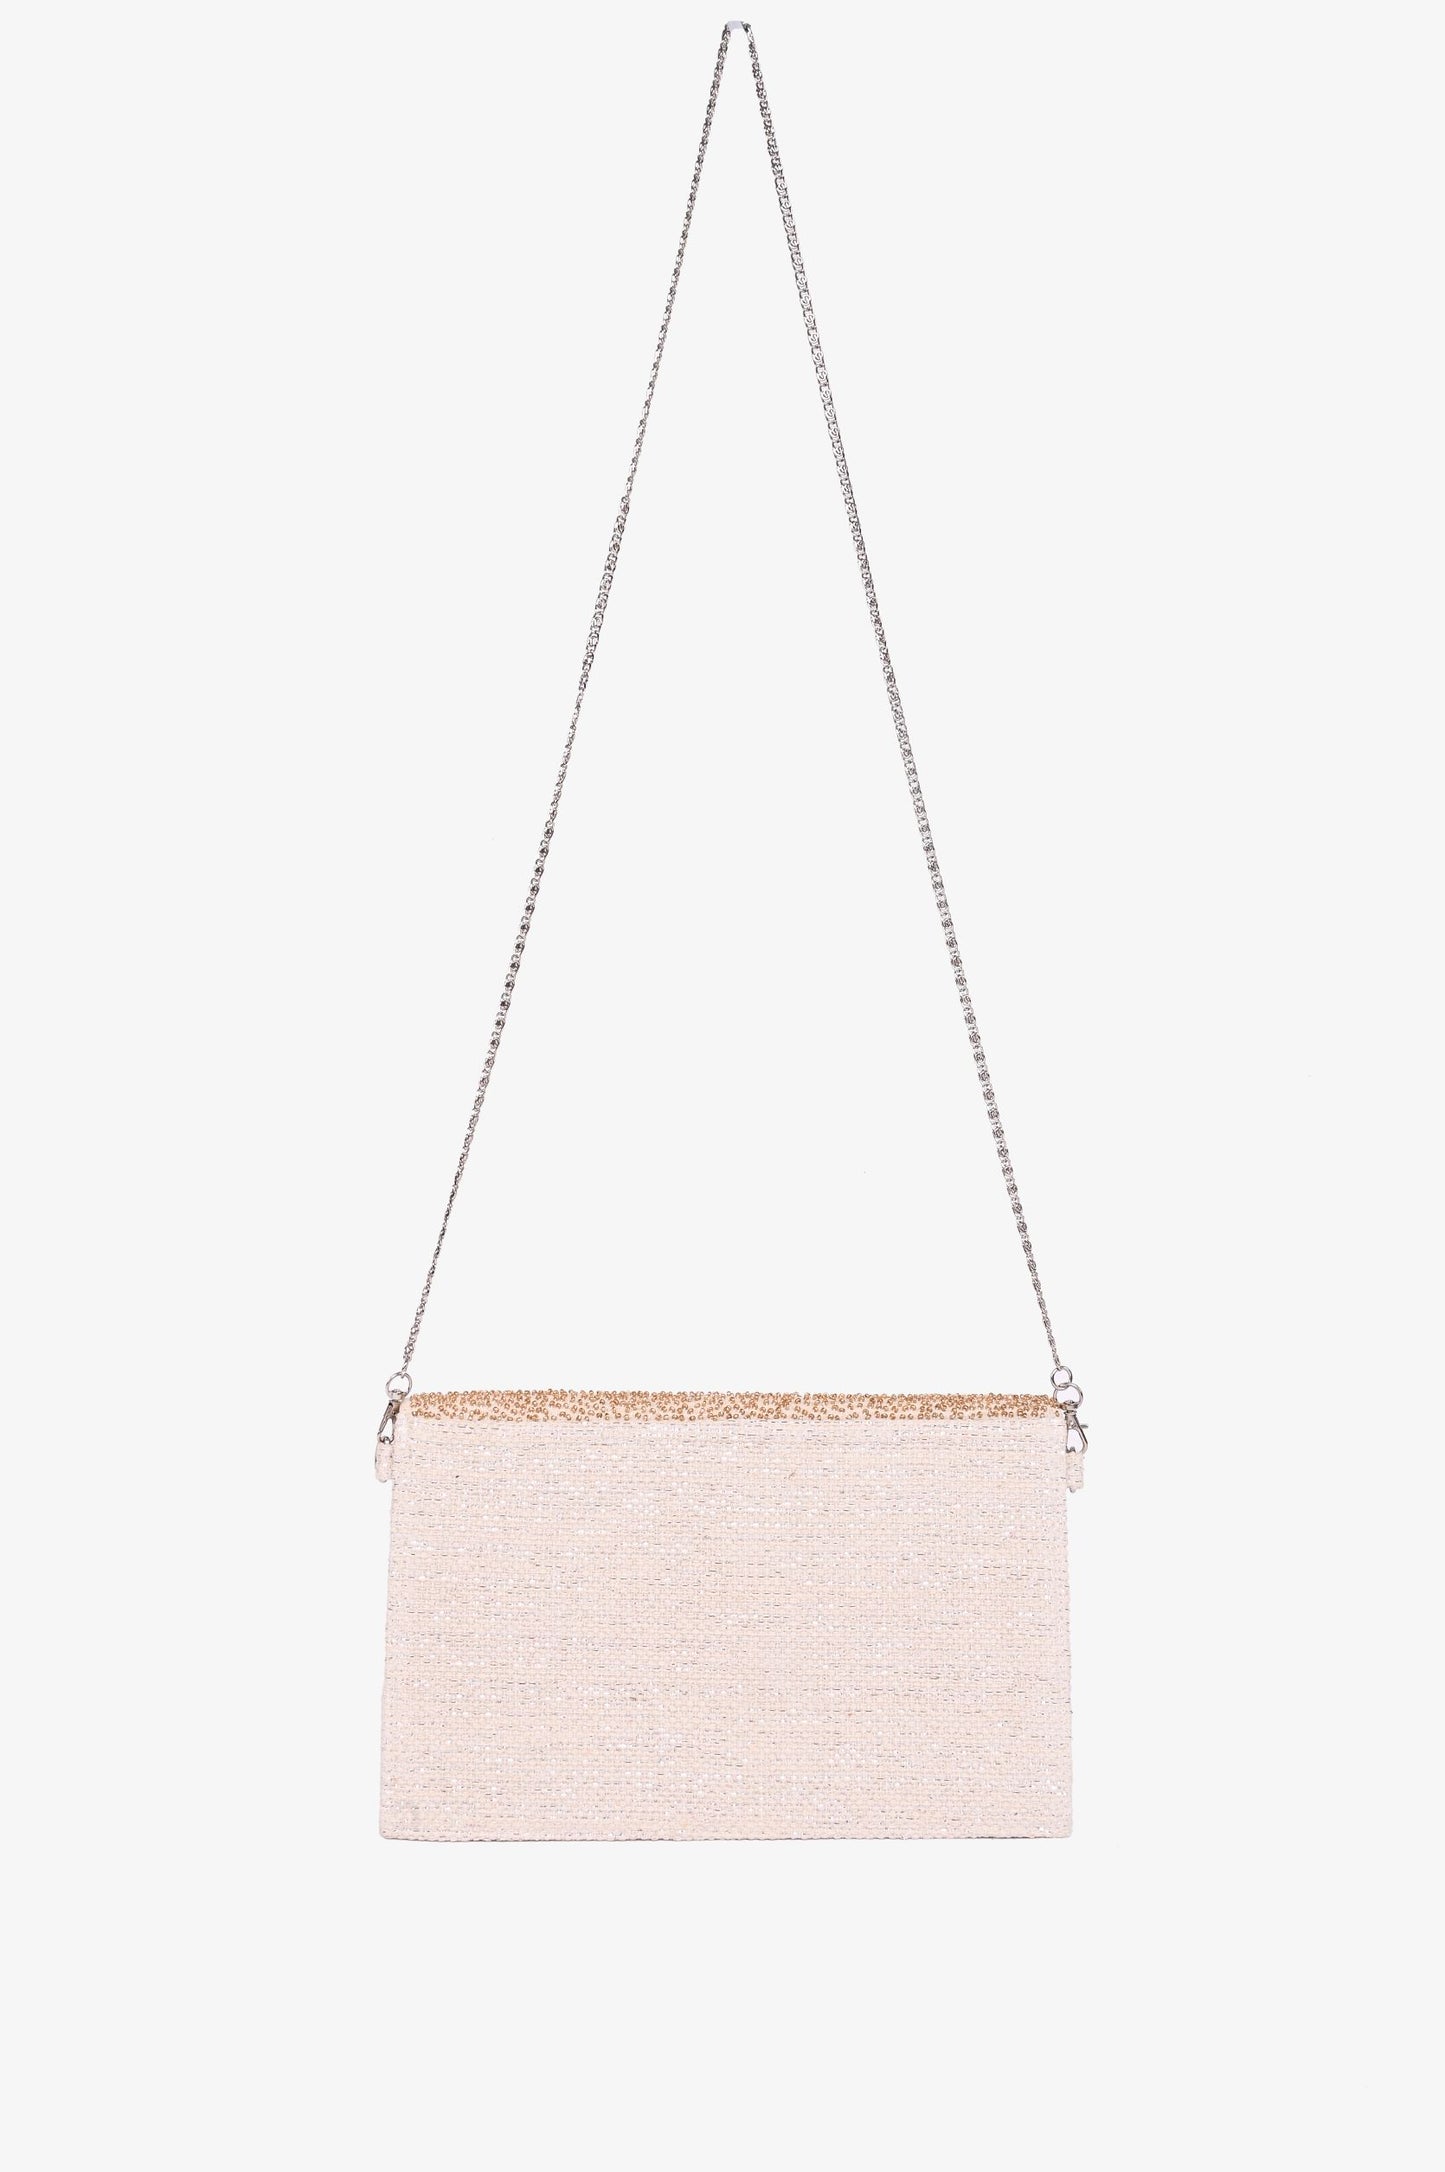 Golden Glam Beaded Clutch - Simply Clutched